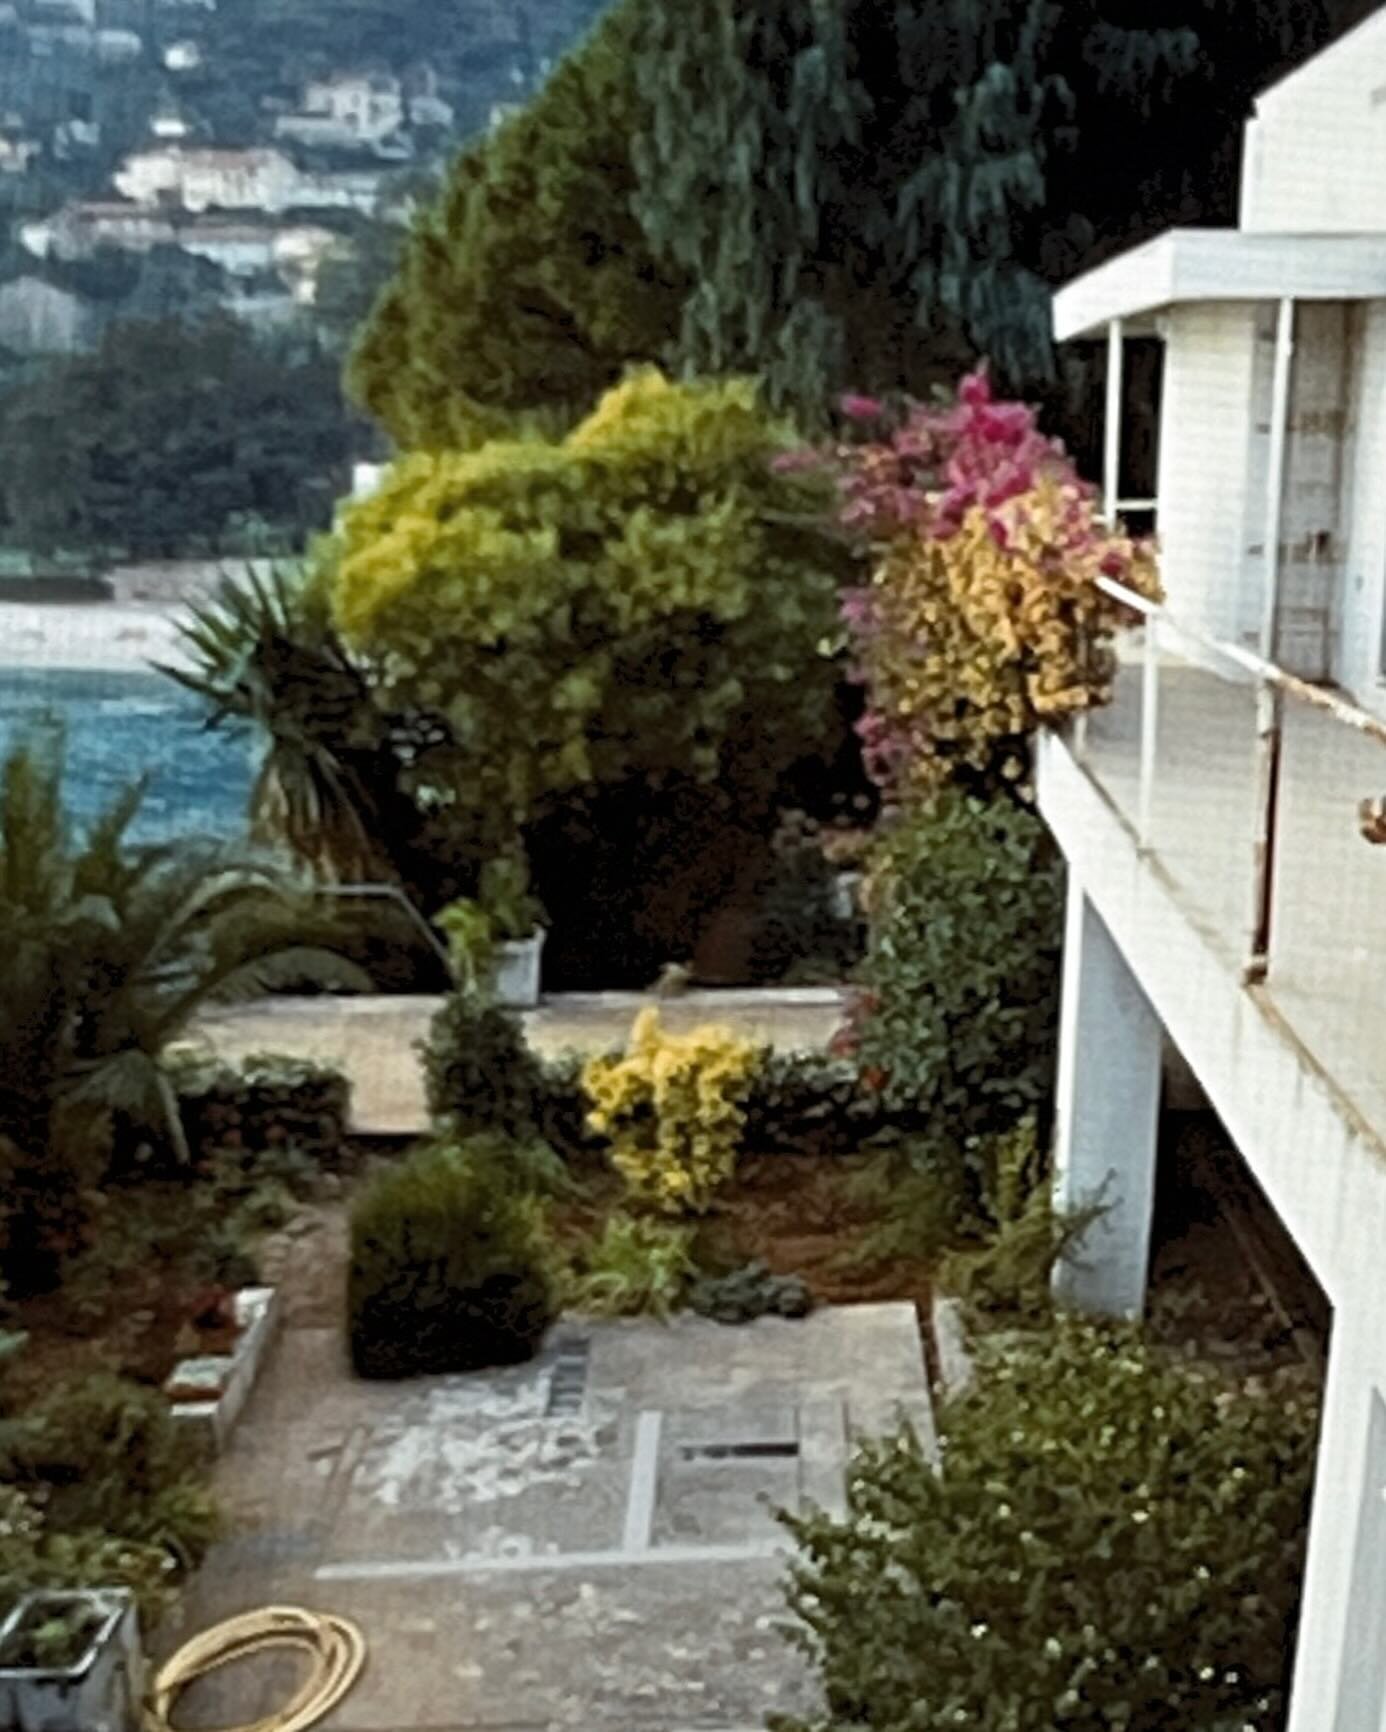 Images I took in 1991 of Eileen Gray&rsquo;s E1027 house for my dissertation, tutor was David Dunster and external examiner MJ Long, both unfortunately not with us anymore 

#eileengray #architecturedesign #femalearchitect #mediterraneanhouse #archit